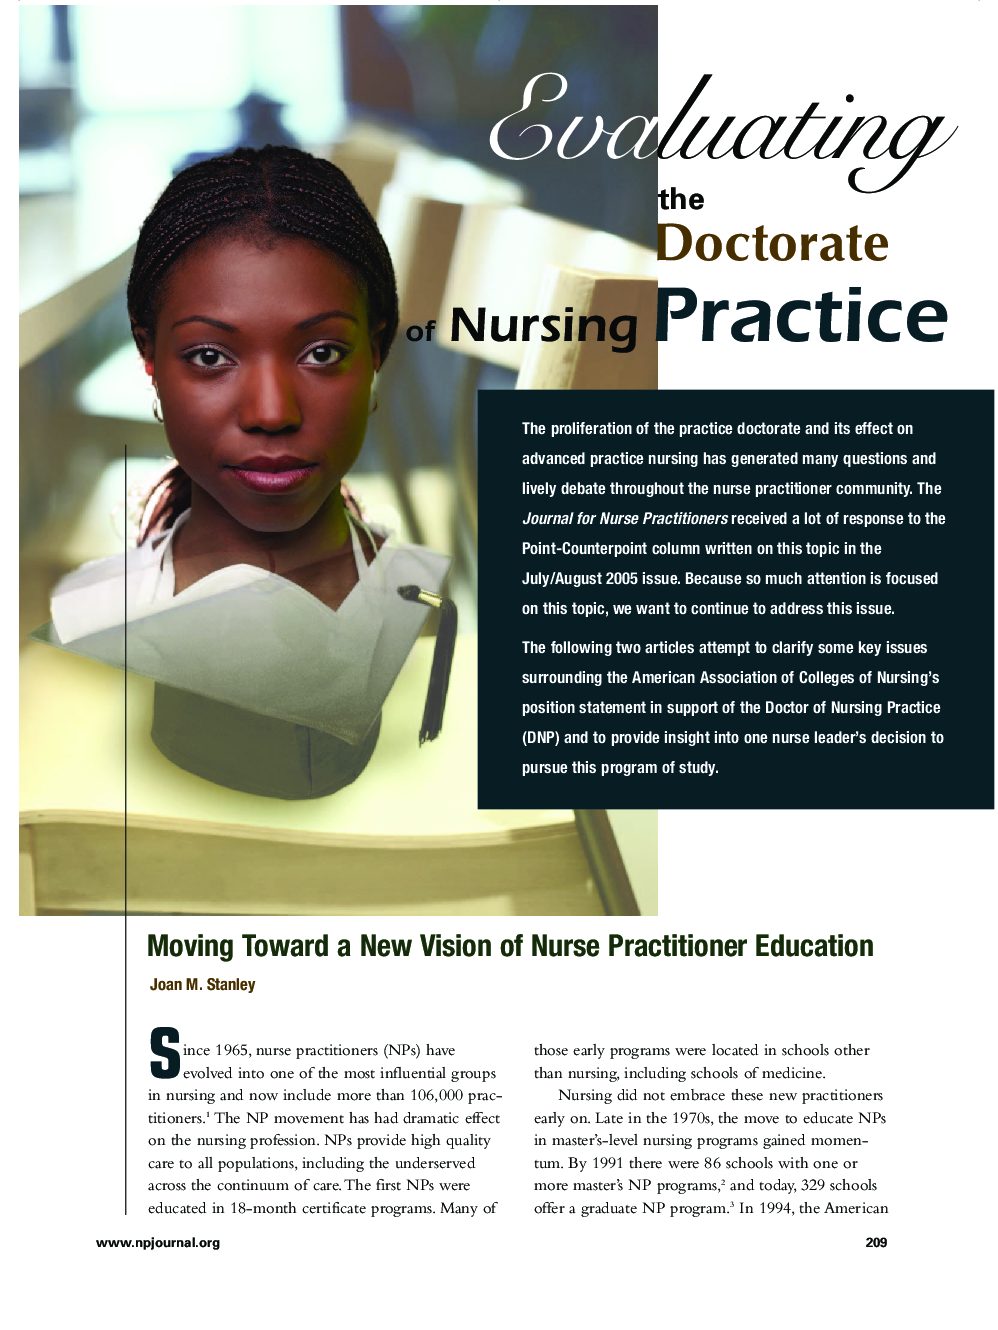 Evaluating the Doctorate of Nursing Practice